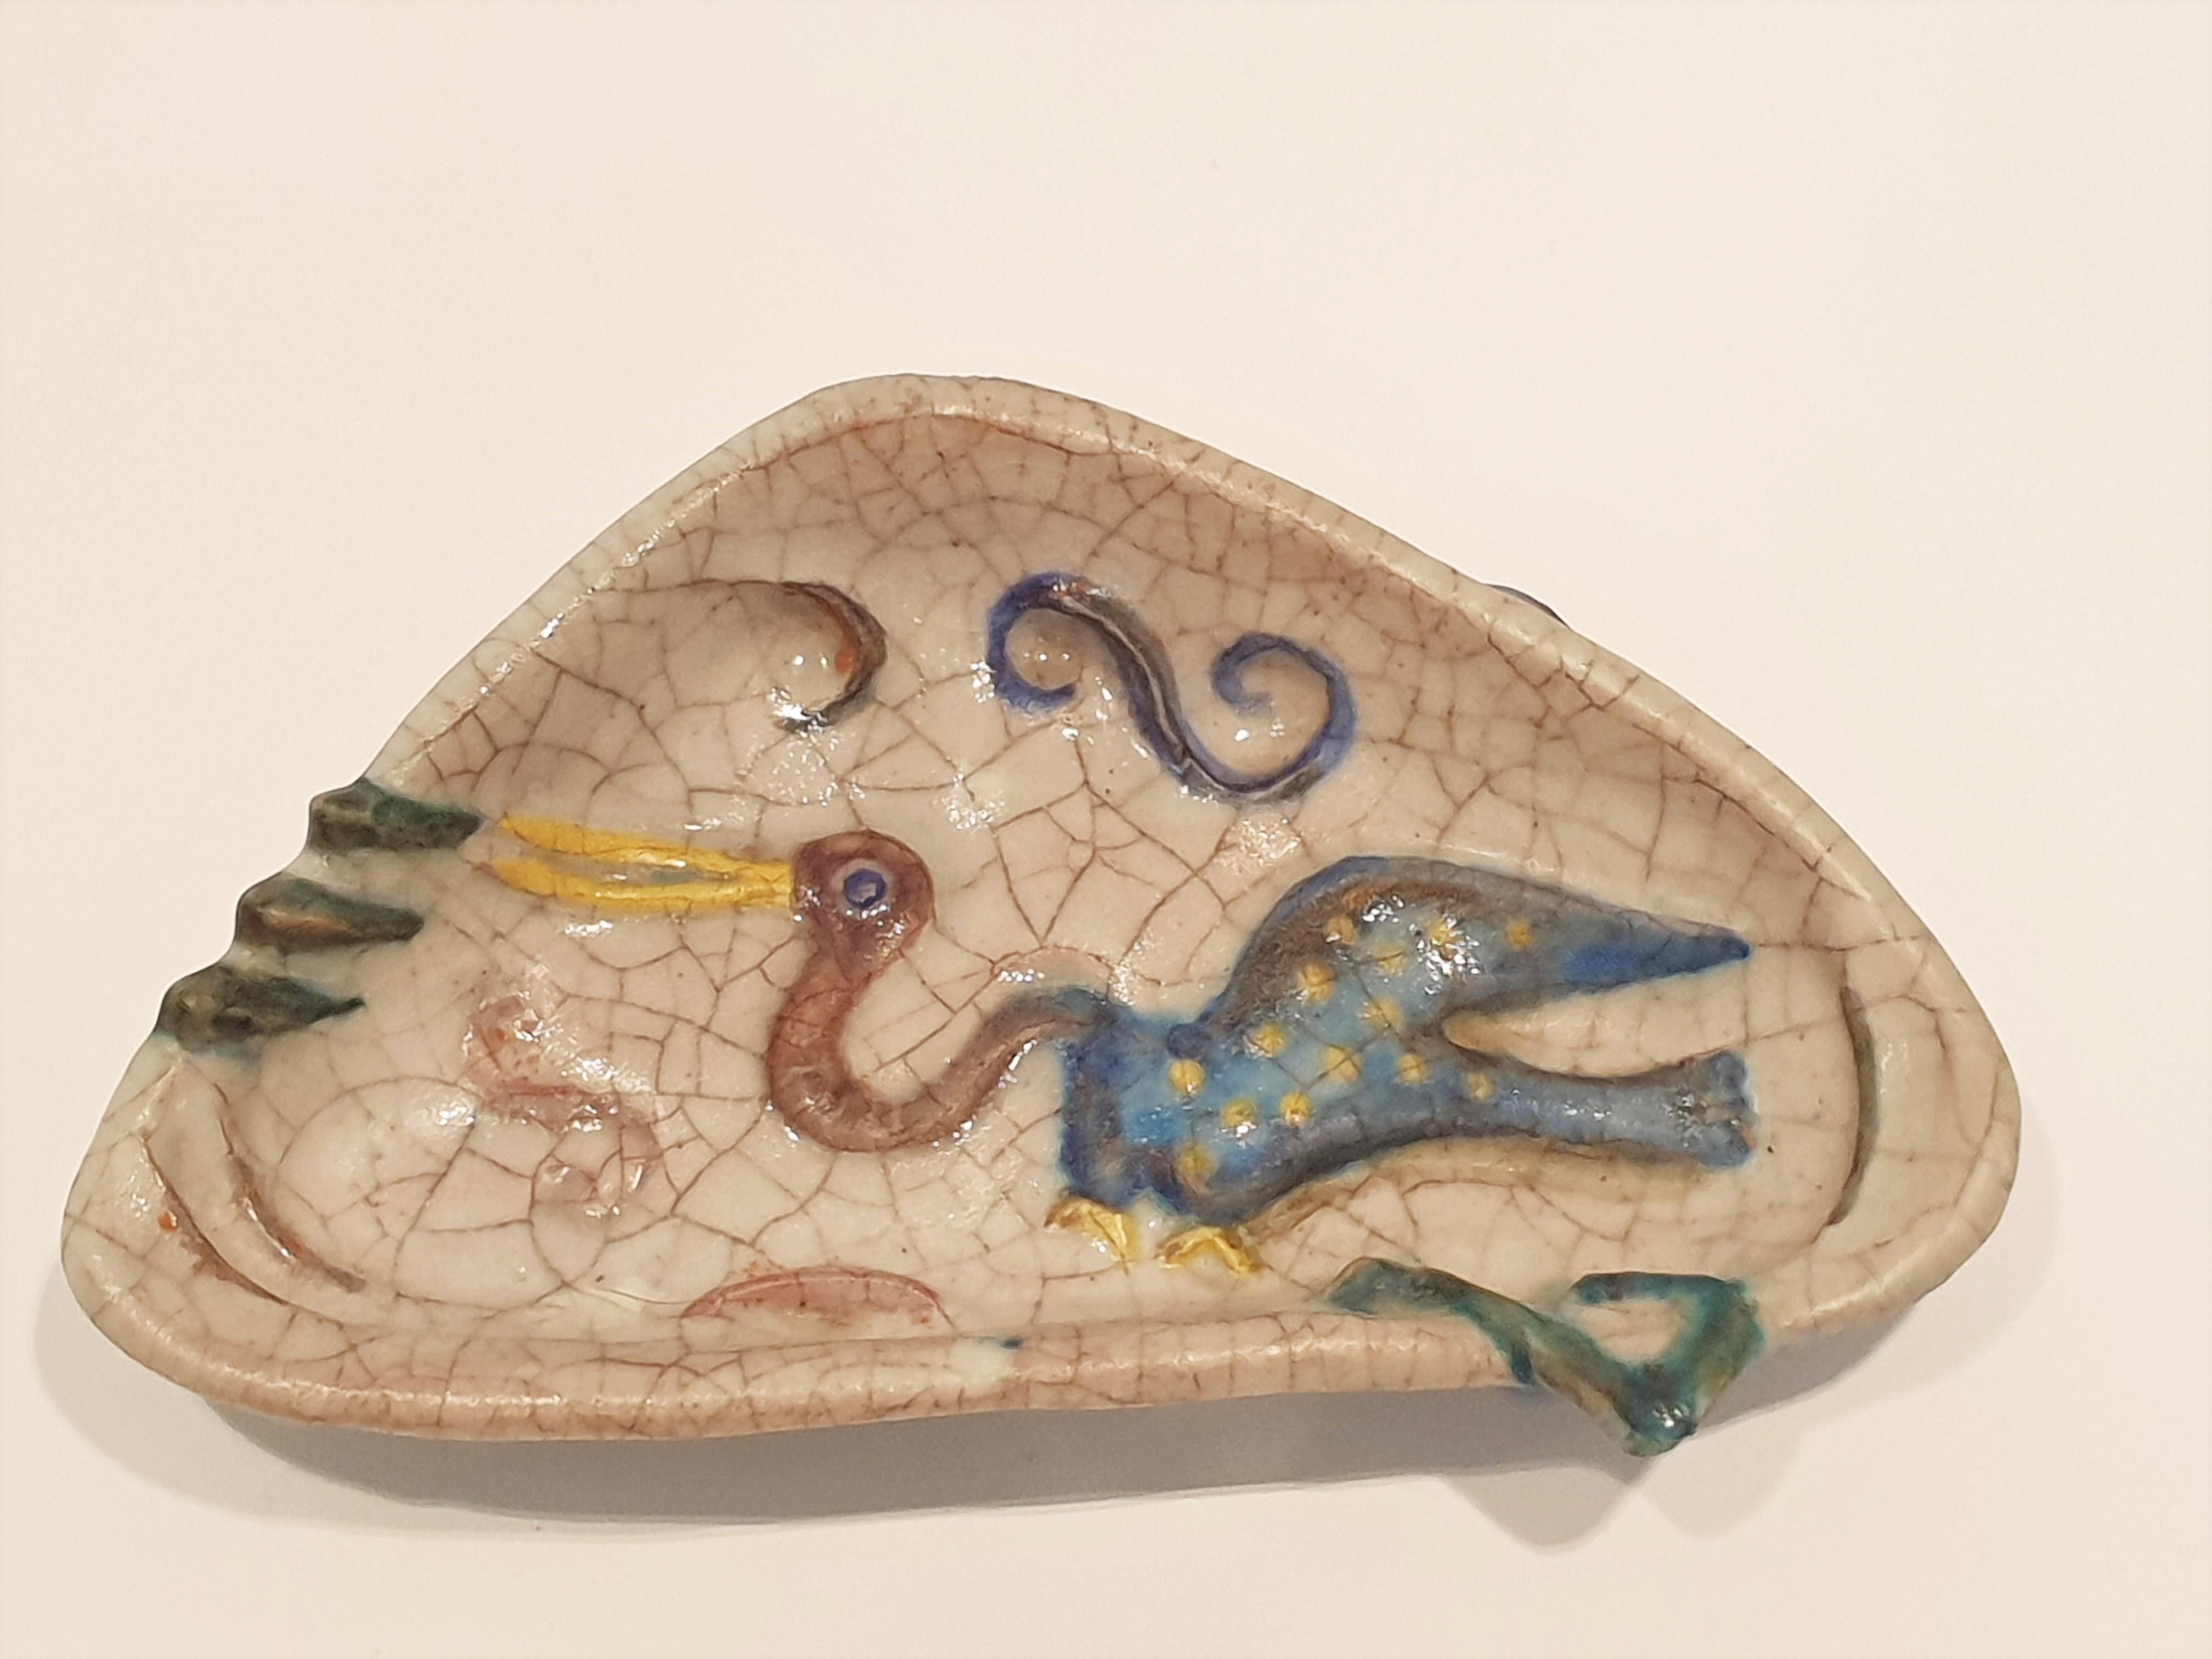 Colourful Mid Century, Italian ceramic dish with raised decoration of a stork in crackle glaze. Signed to the base Fantoni.
We have three dishes available.